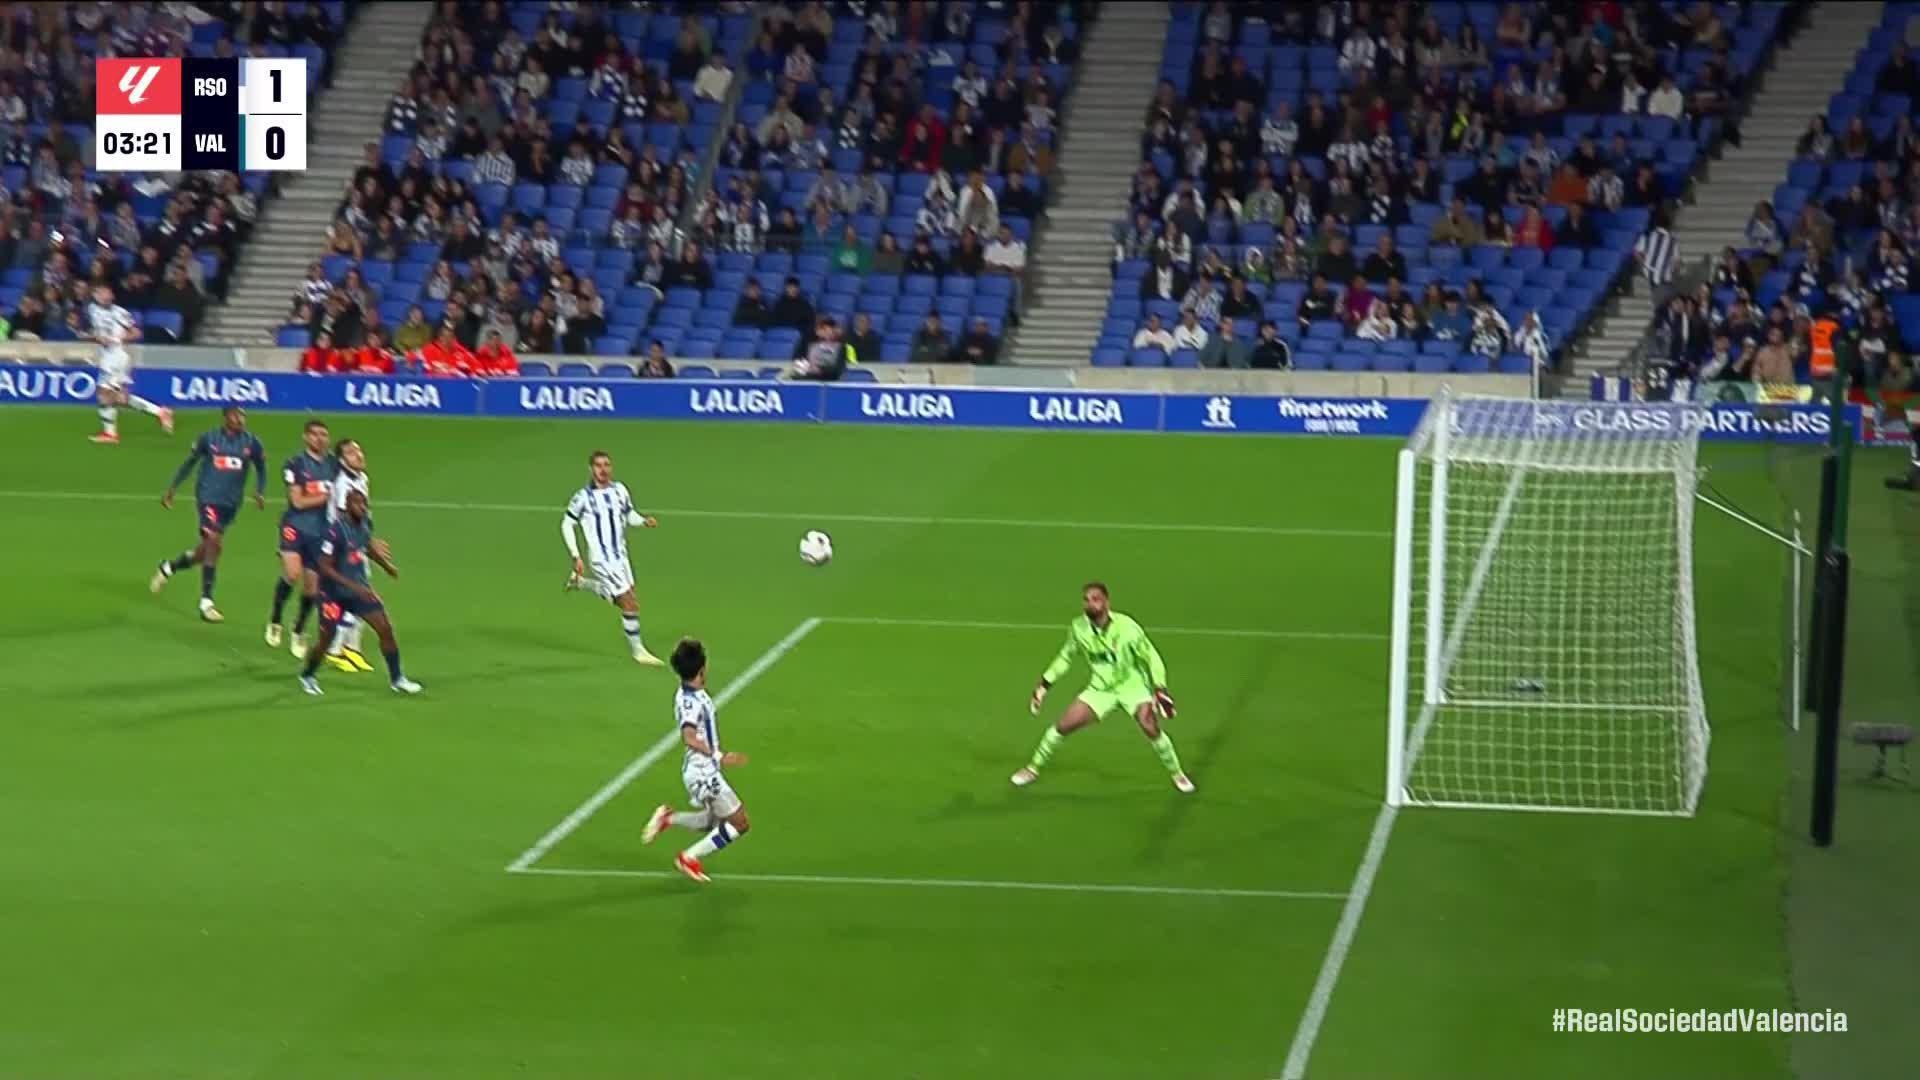 André Silva slots in the goal for Real Sociedad